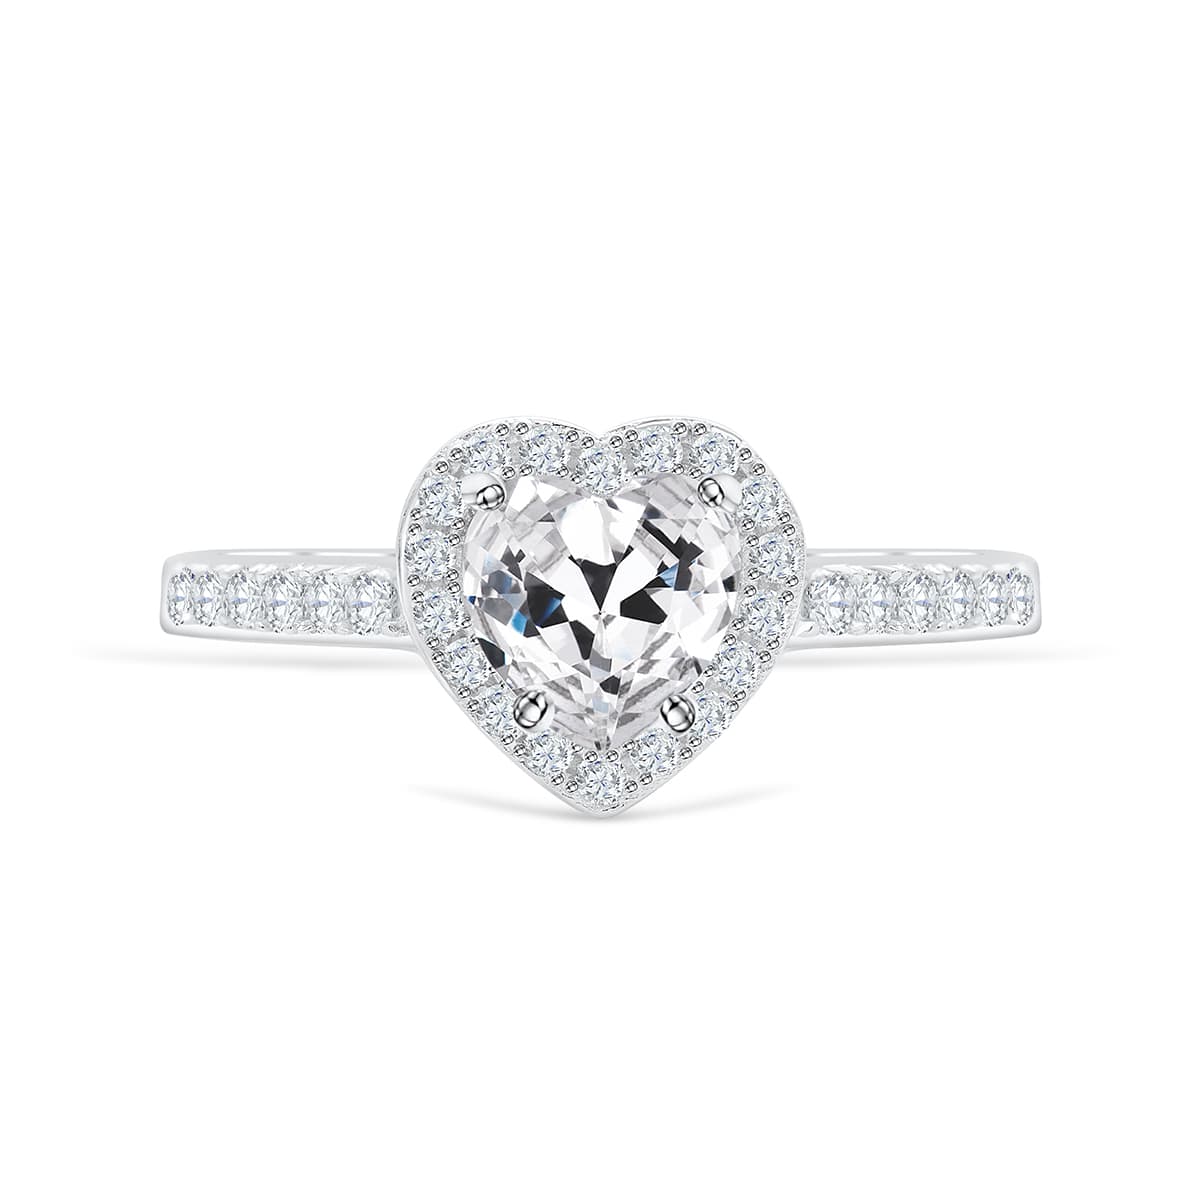 the sweetheart silver heart shaped halo wedding ring